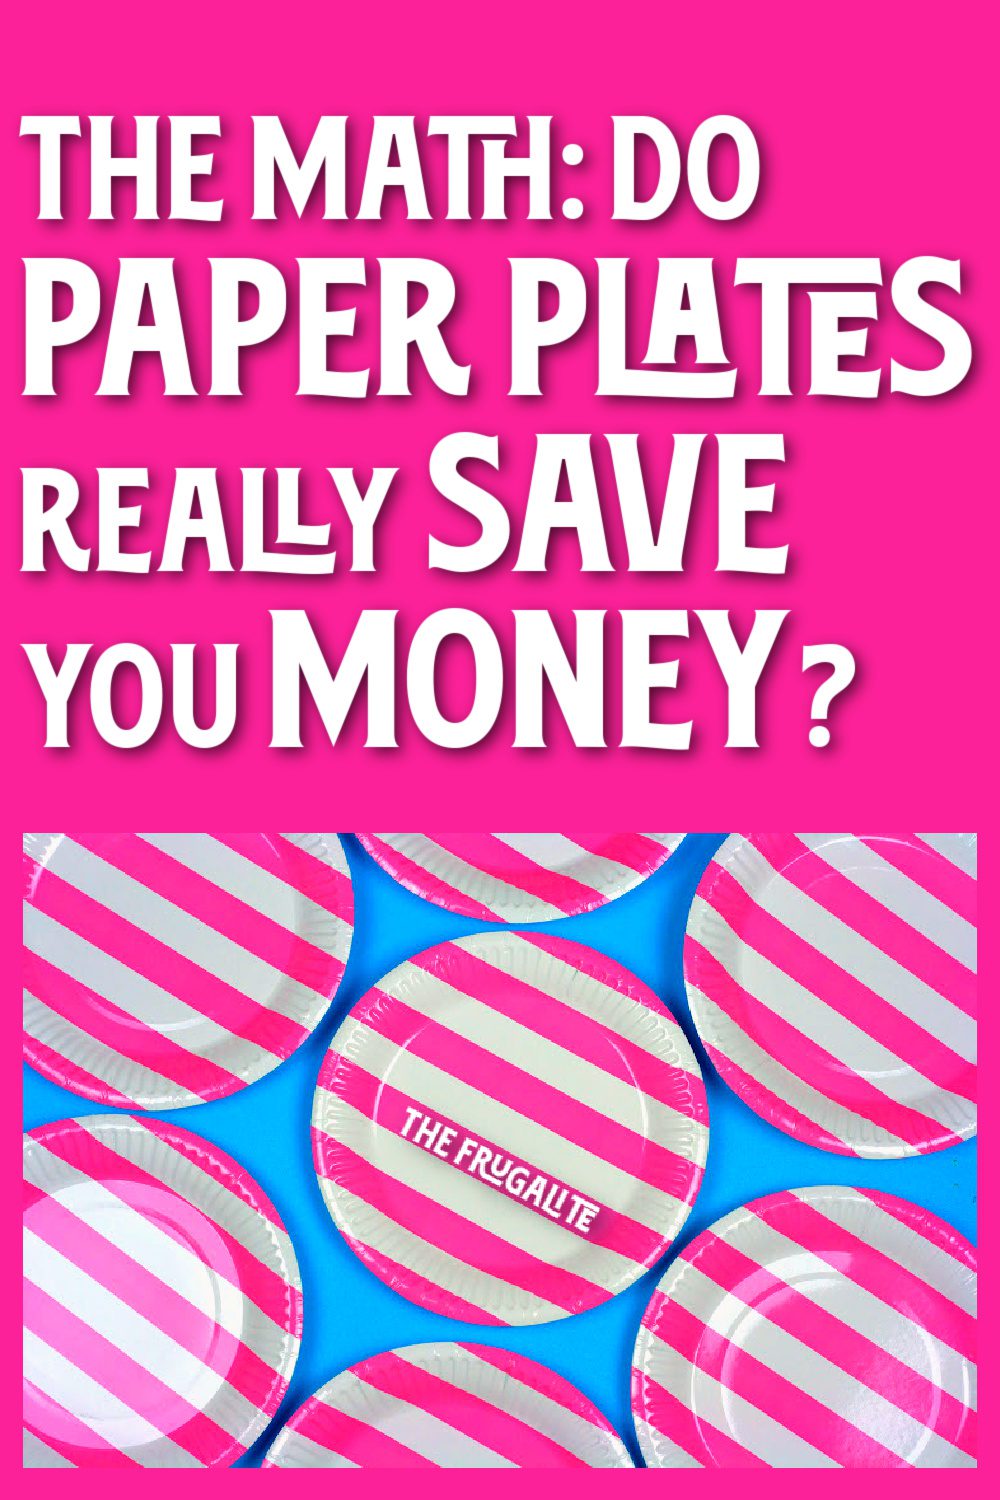 Do Paper Plates Really Save You Money?